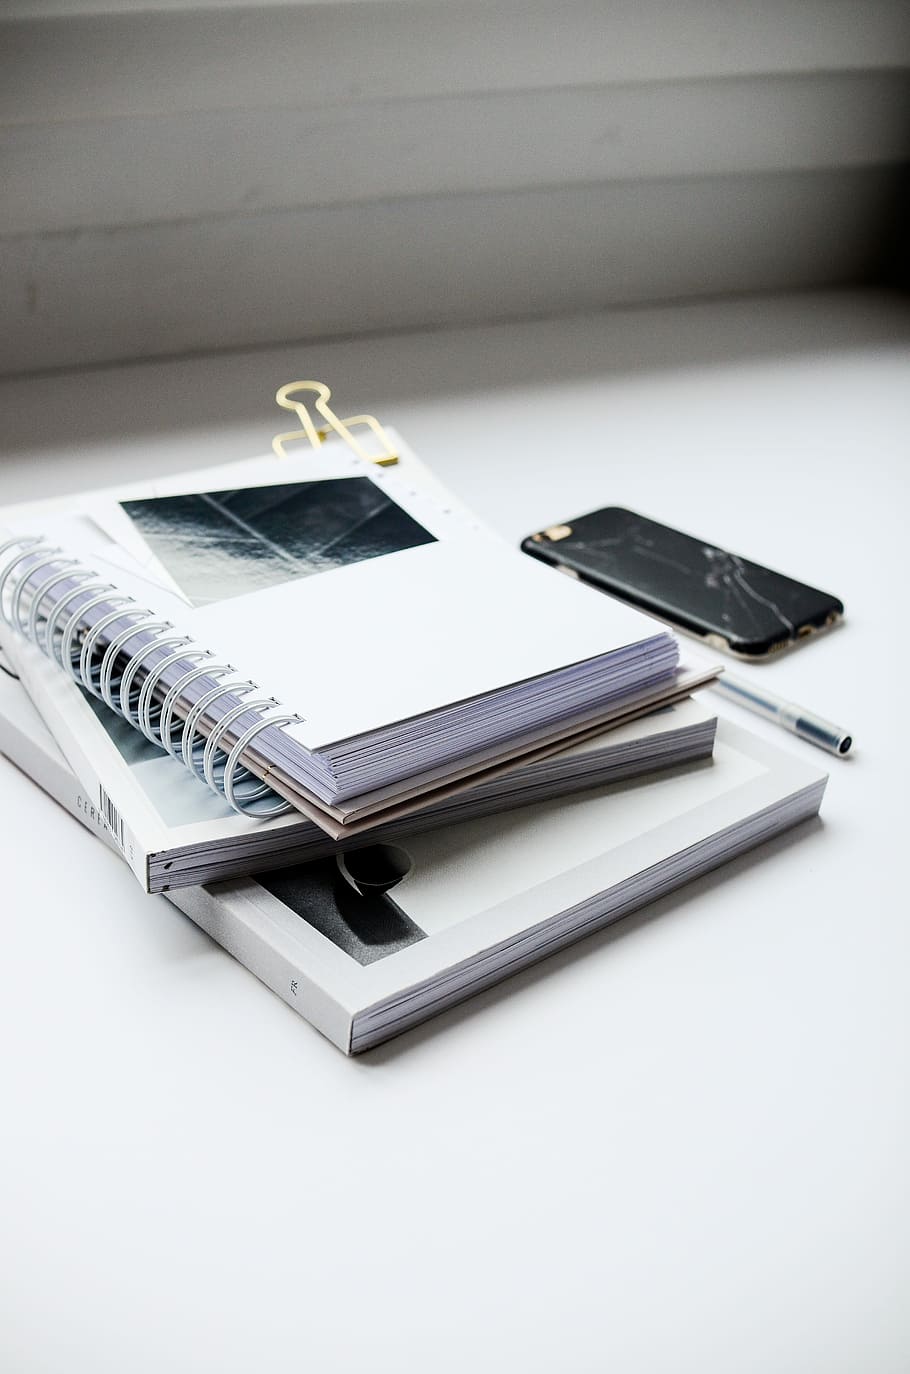 White Spiral Notebook Beside Black Smartphone On White - Iphone Books - HD Wallpaper 